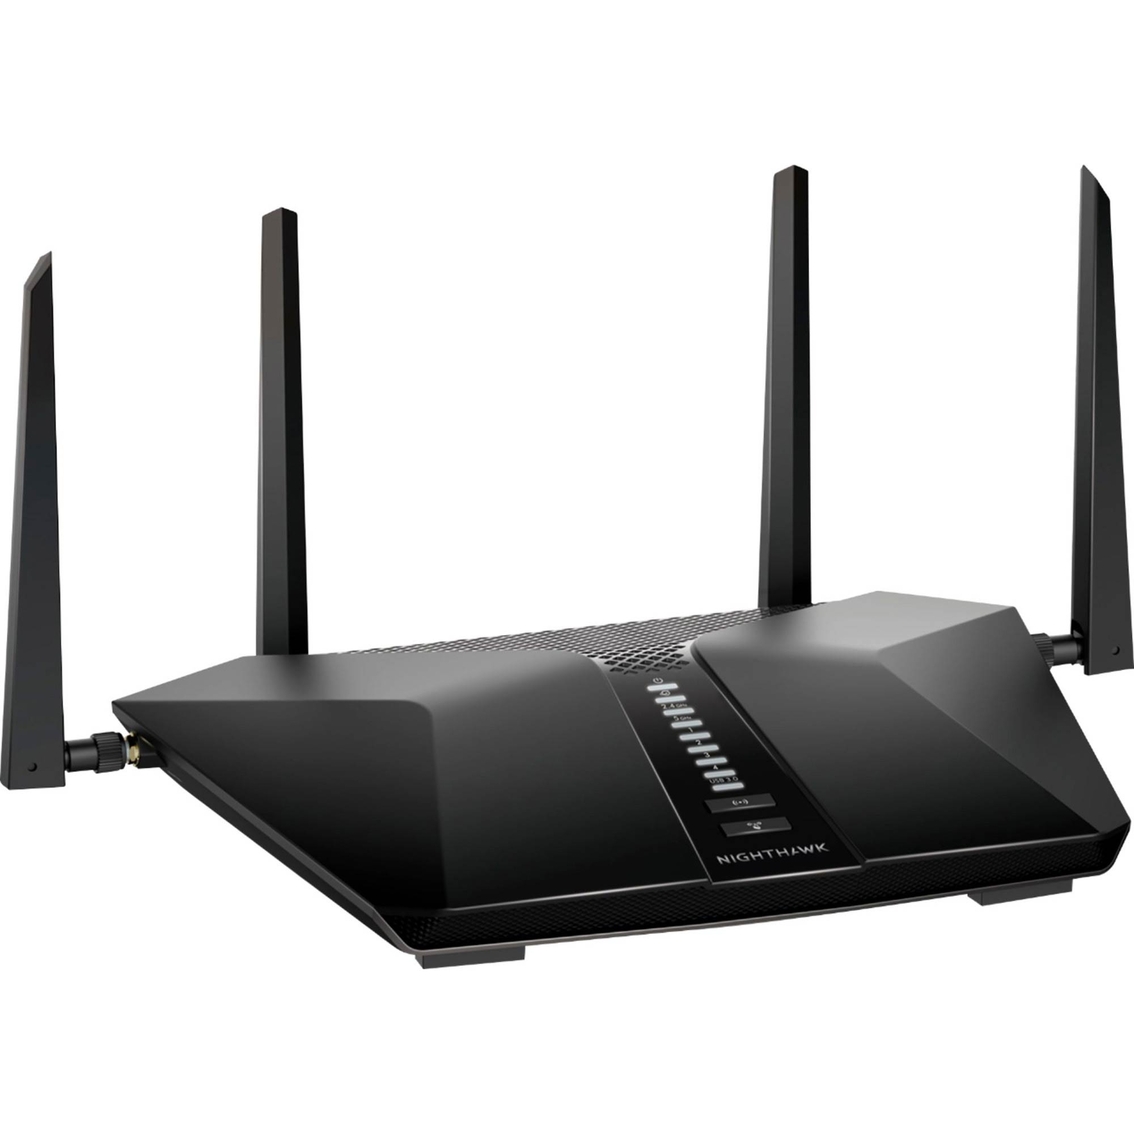 Netgear Nighthawk Ax5400 Dual Band Wireless And Ethernet Router Networking Electronics Shop The Exchange